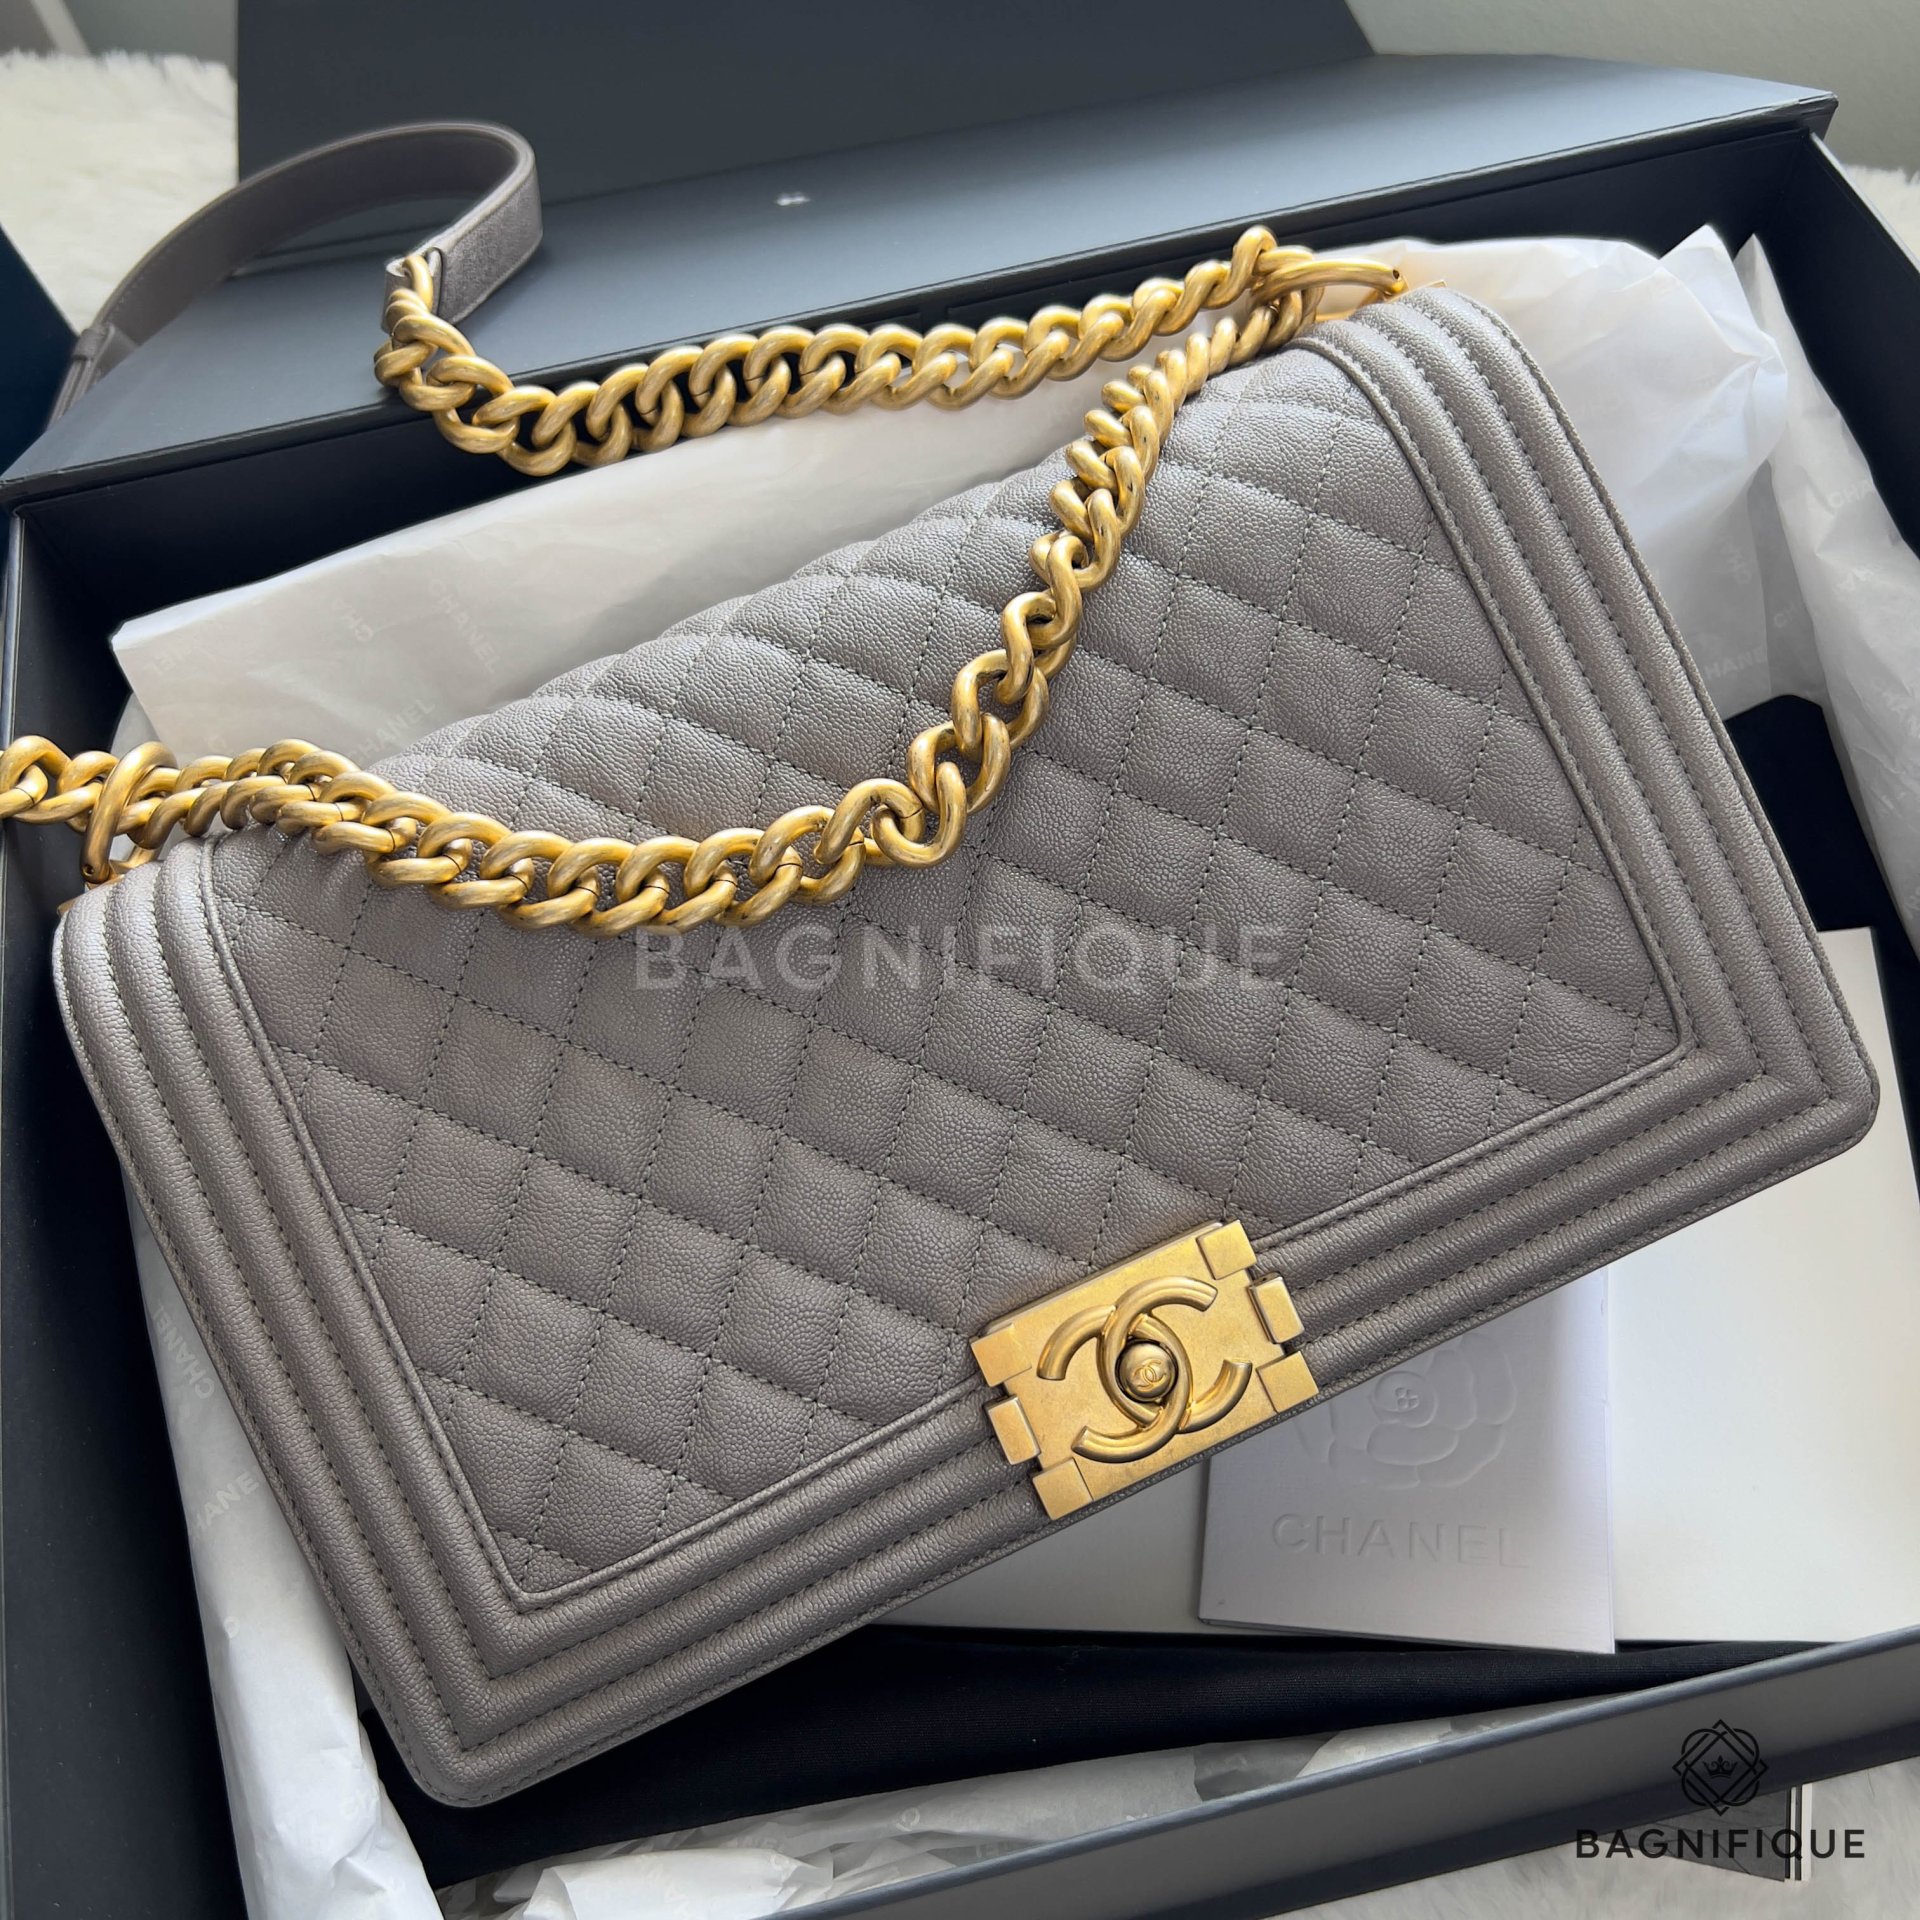 Chanel Boy Old Medium Cracked Metallic with Aged Gold Hardware Preowned  in Box WA001  Julia Rose Boston  Shop